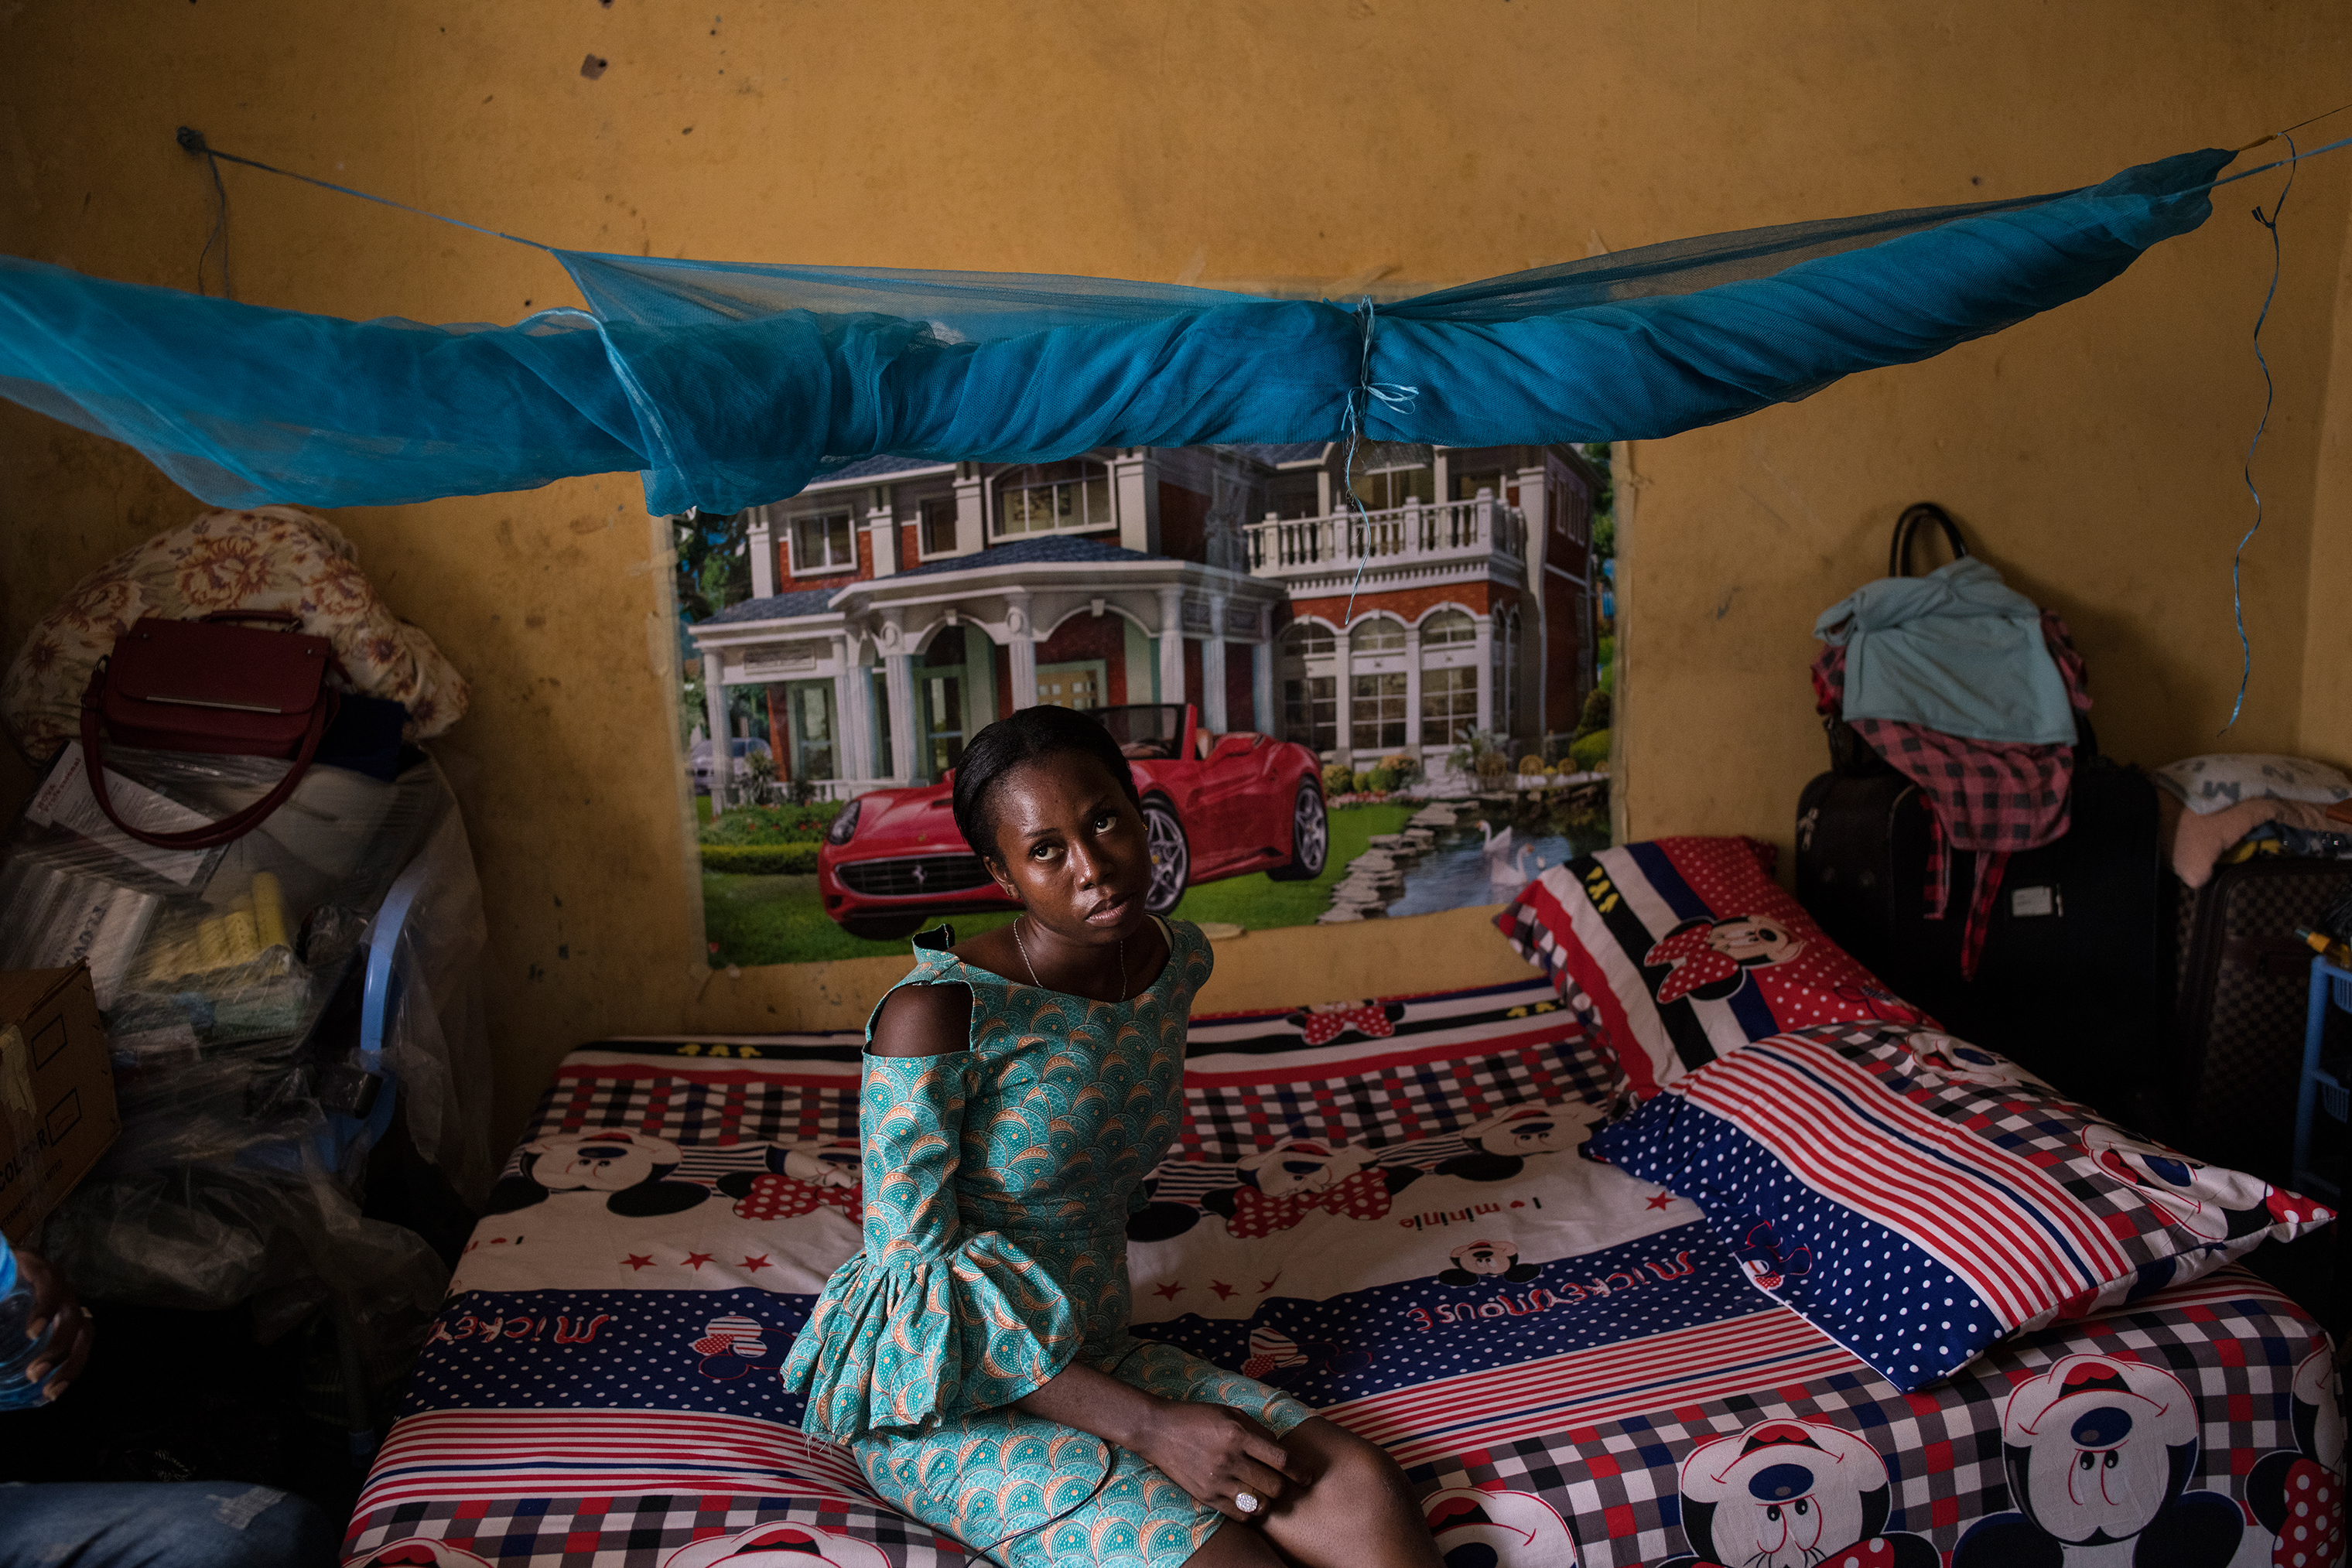 Florence, 24, about 10 days after getting married in Benin City on March 26. She jokes that she would love to have a house and a car—like the one in the poster behind her—once her hair salon business takes off. (Lynsey Addario—Verbatim for TIME)